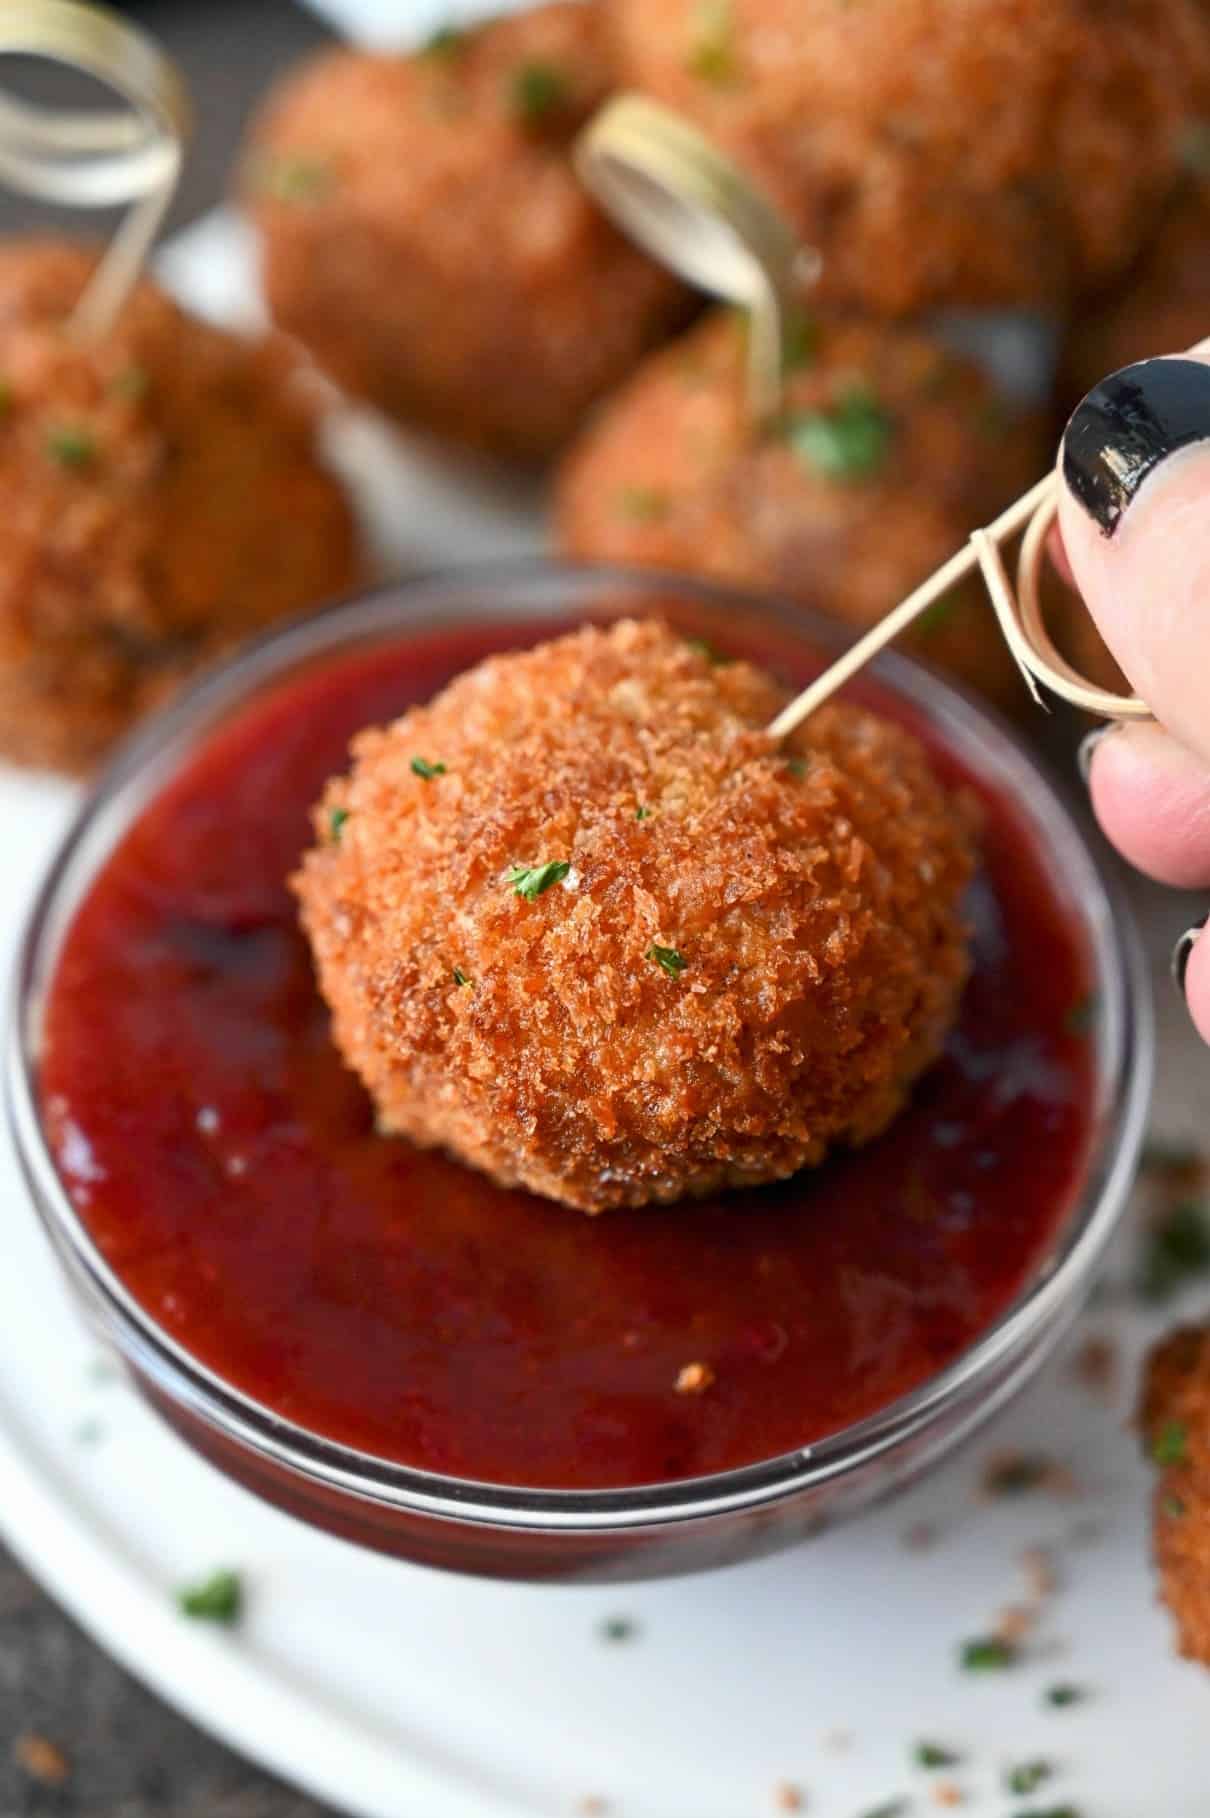 Deep fried breaded ball full of leftover stuffing. On an toothpick and being dipped inot bbq cranberry sauce.